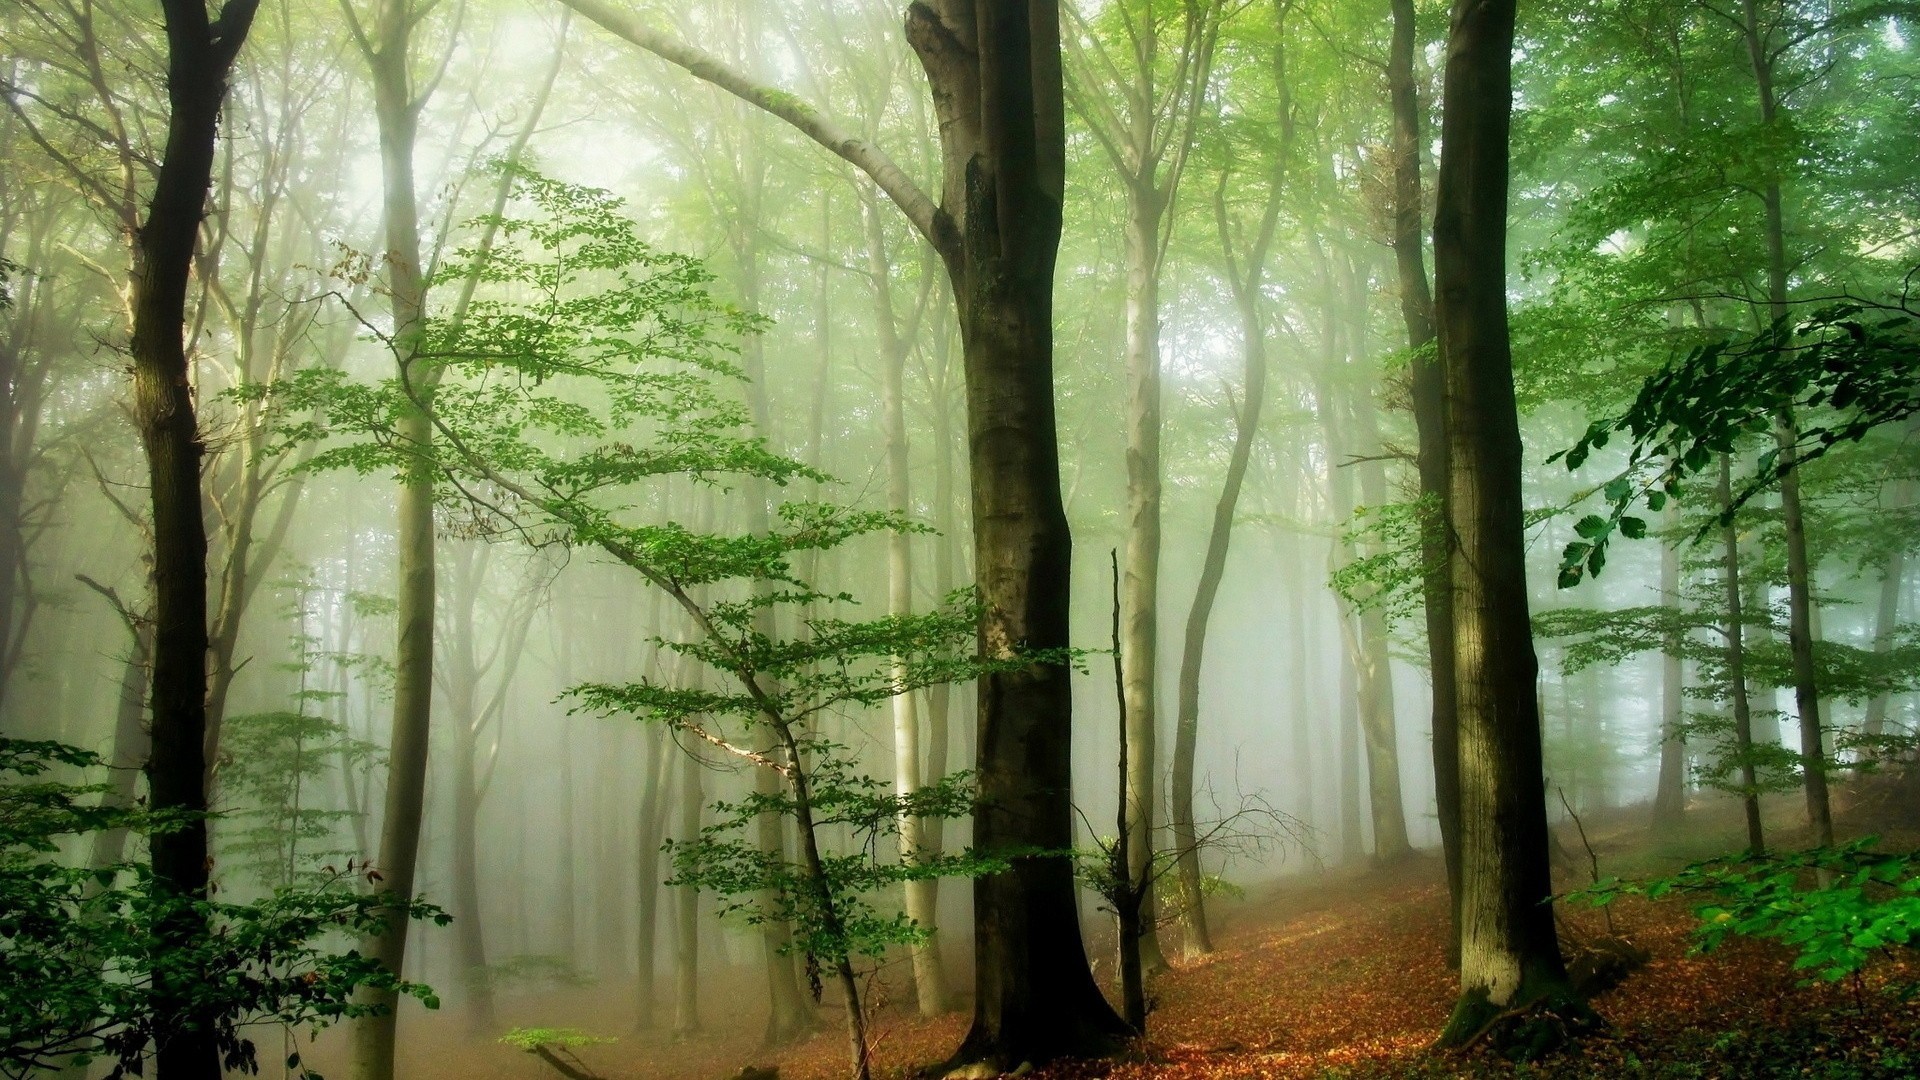 General 1920x1080 forest sunlight mist nature trees plants